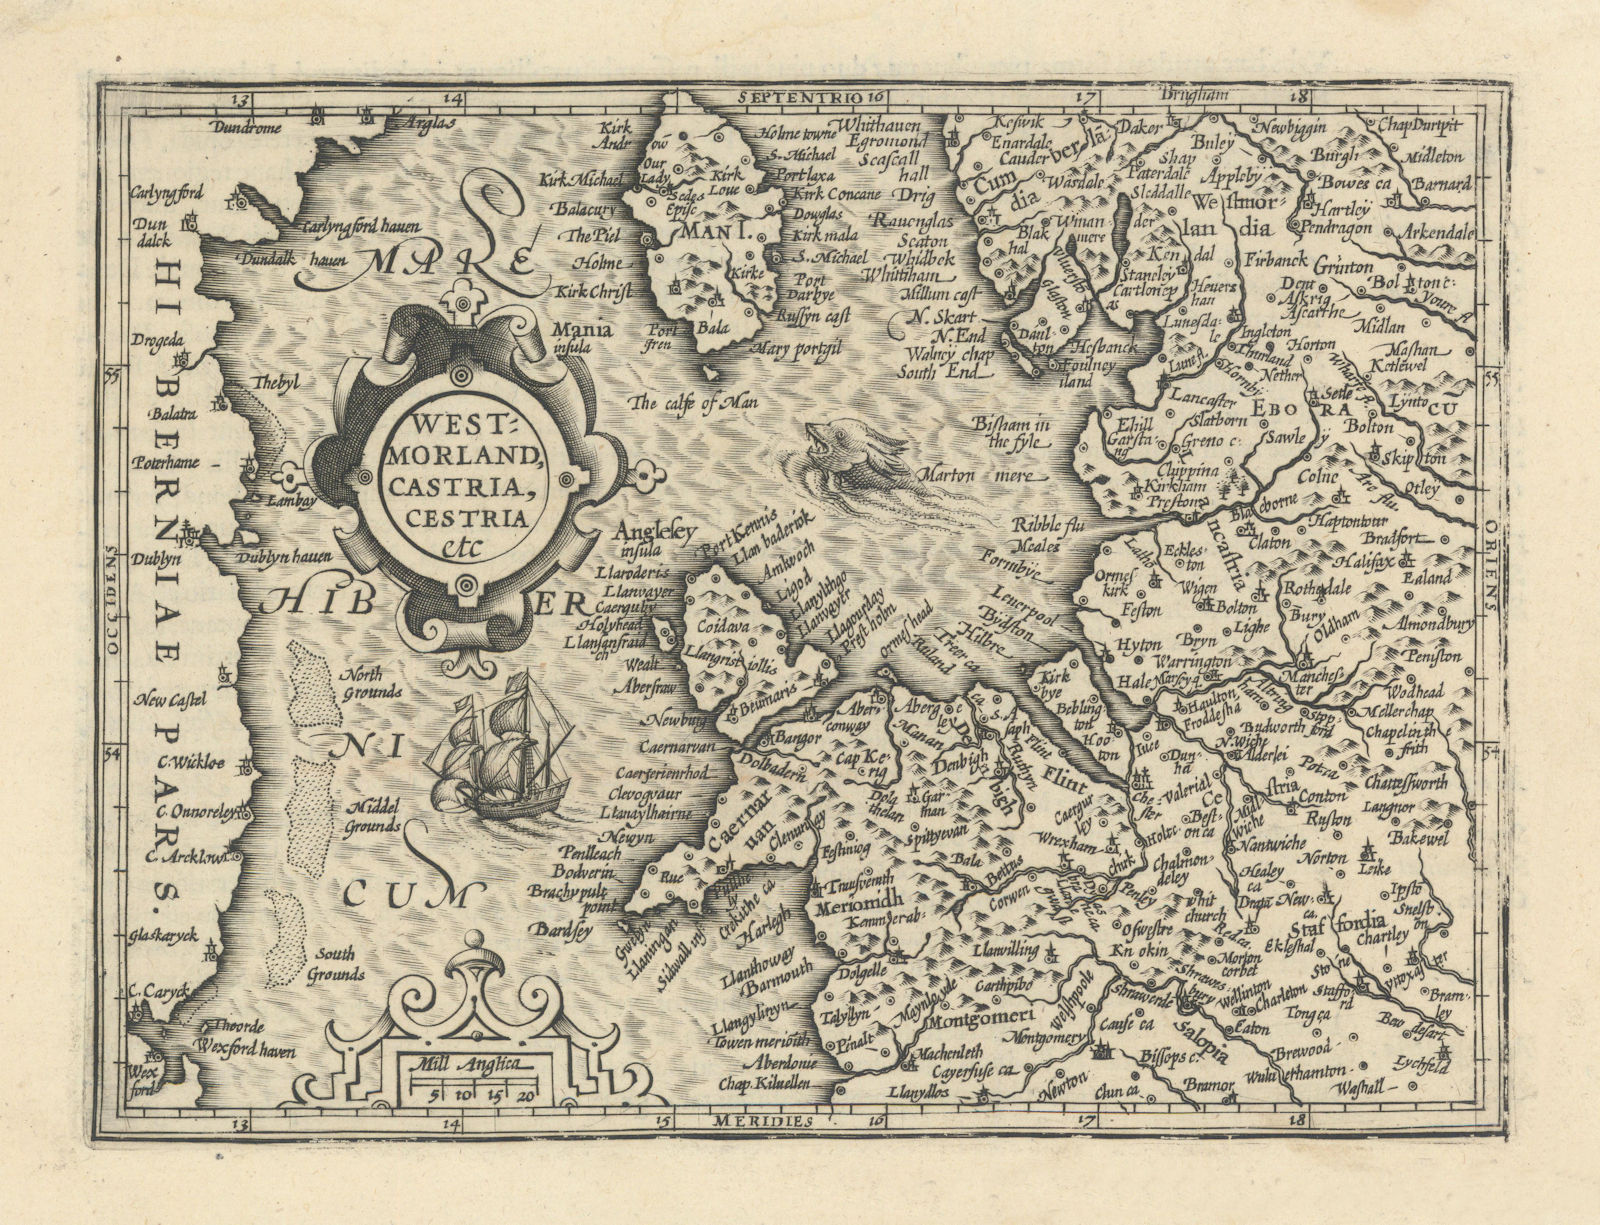 Westmorland, Castria, Cestria by Mercator/Hondius. NW England & Wales 1610 map